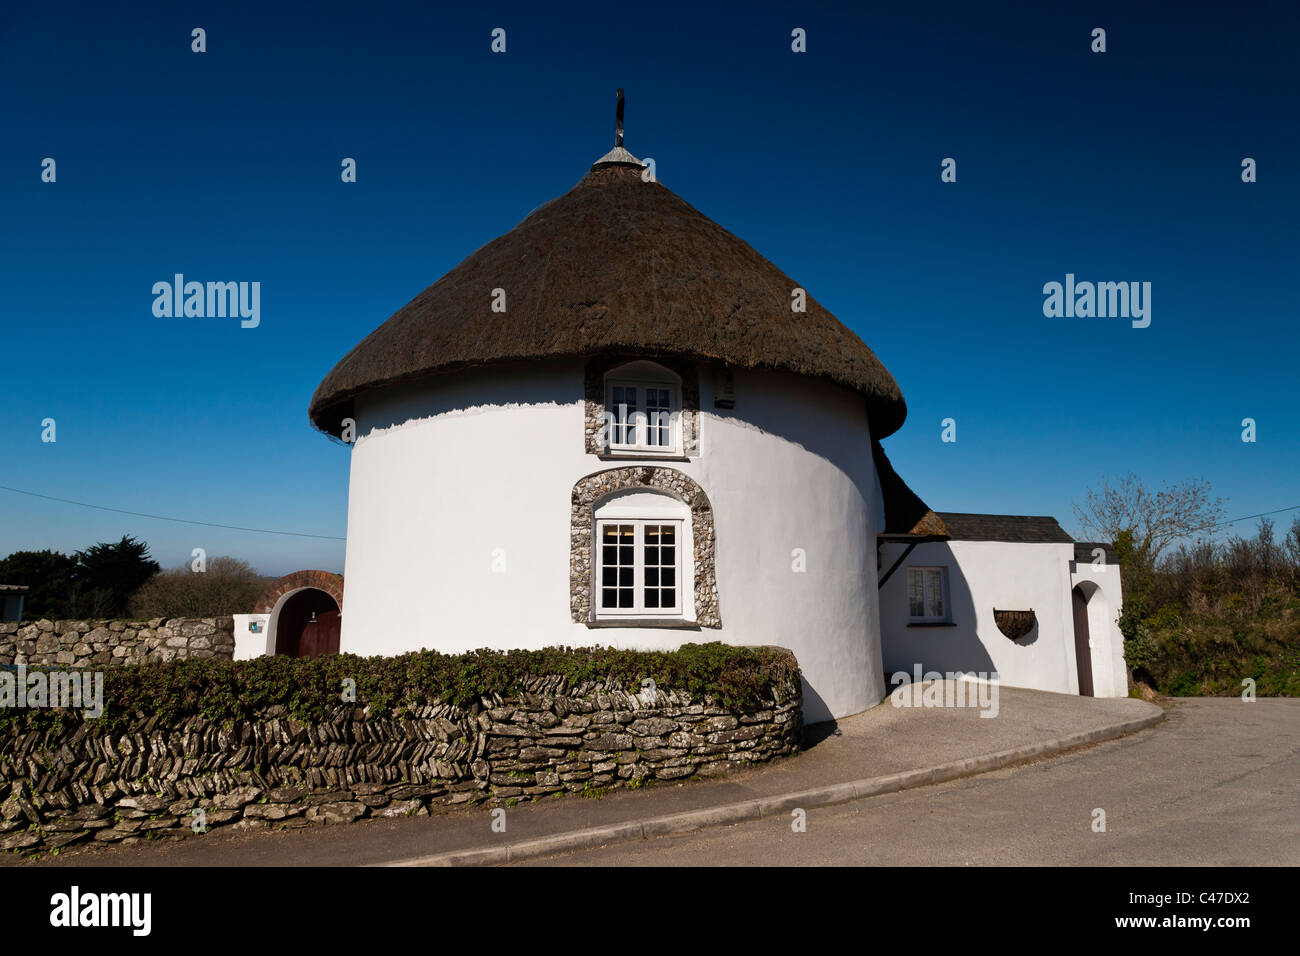 Thatched Cornish Round House Cottage And Blue Sky Stock Photo